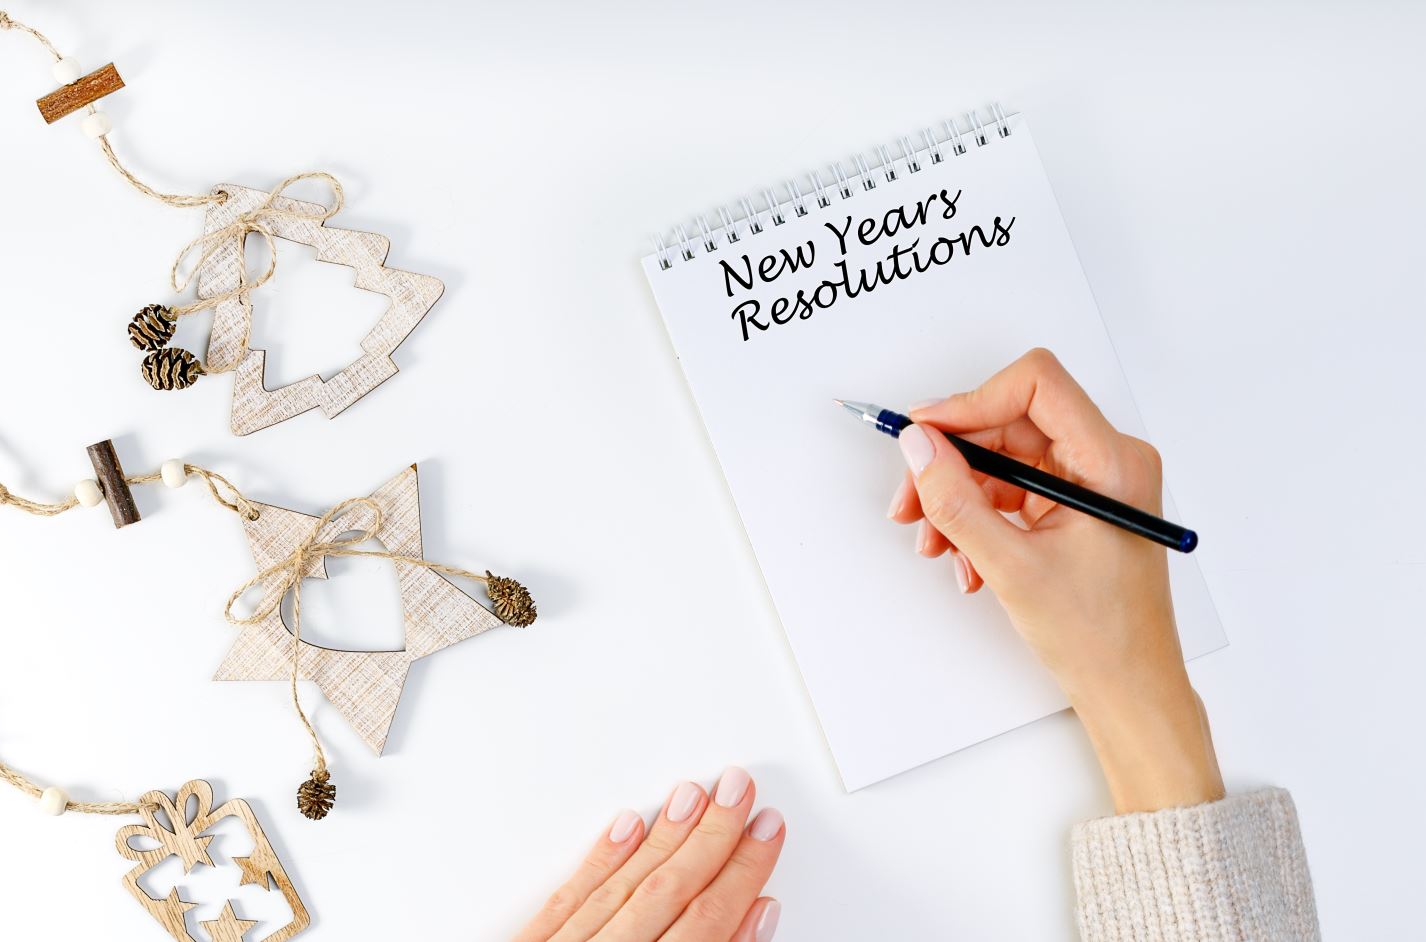 10 Ways to Make Your New Year's Resolutions Stick